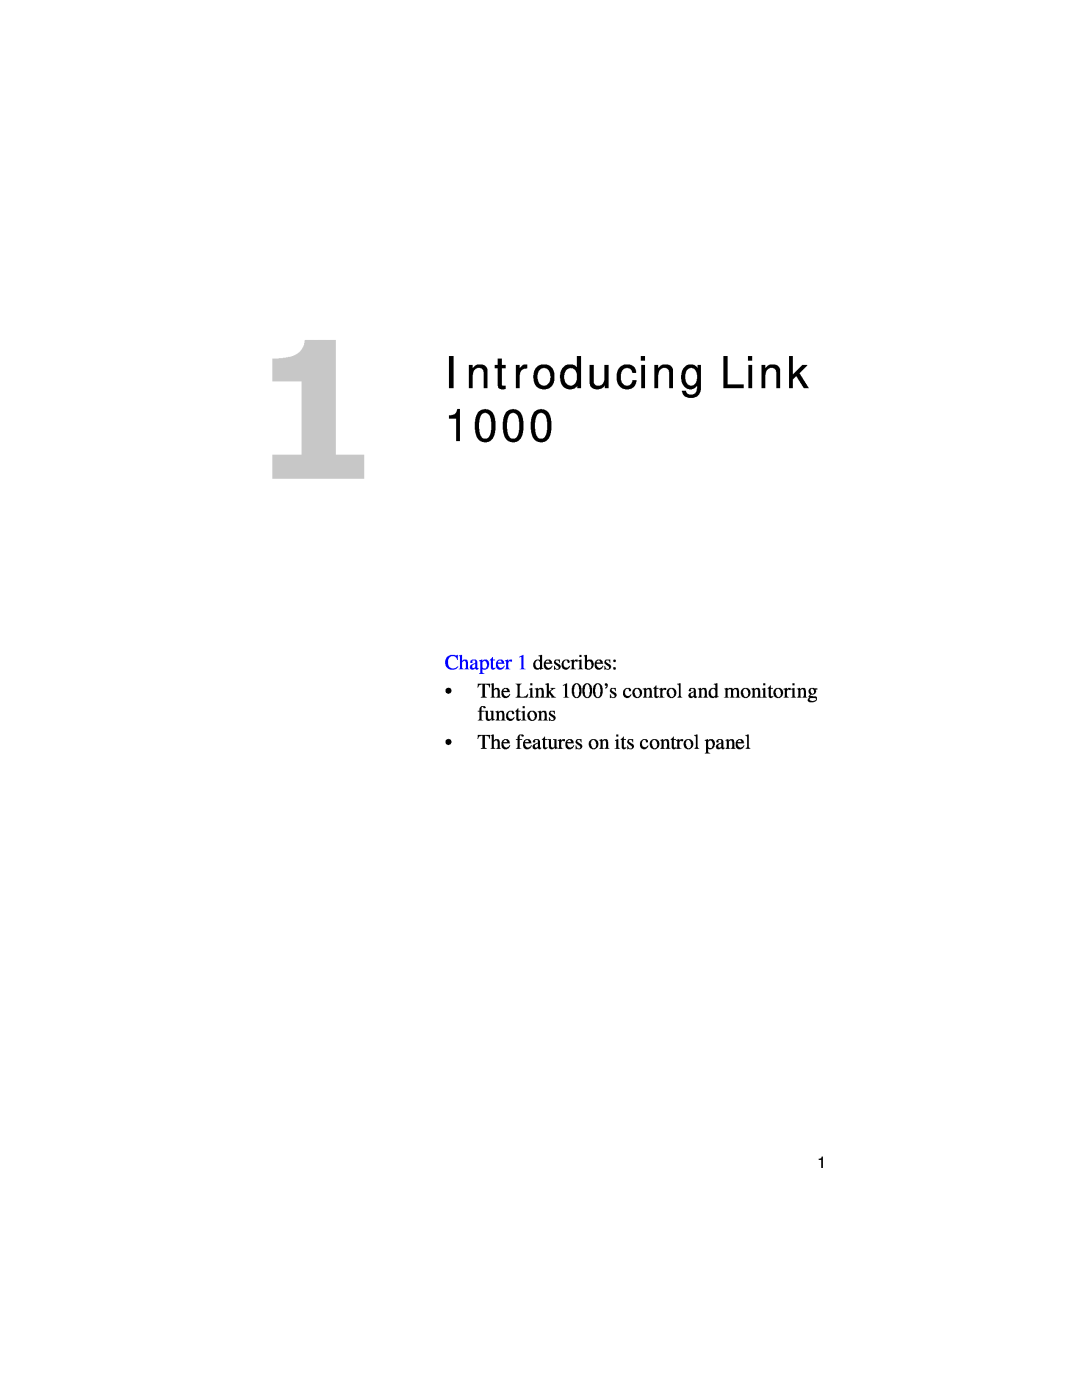 Xantrex Technology manual Introducing Link, describes, The Link 1000’s control and monitoring functions 